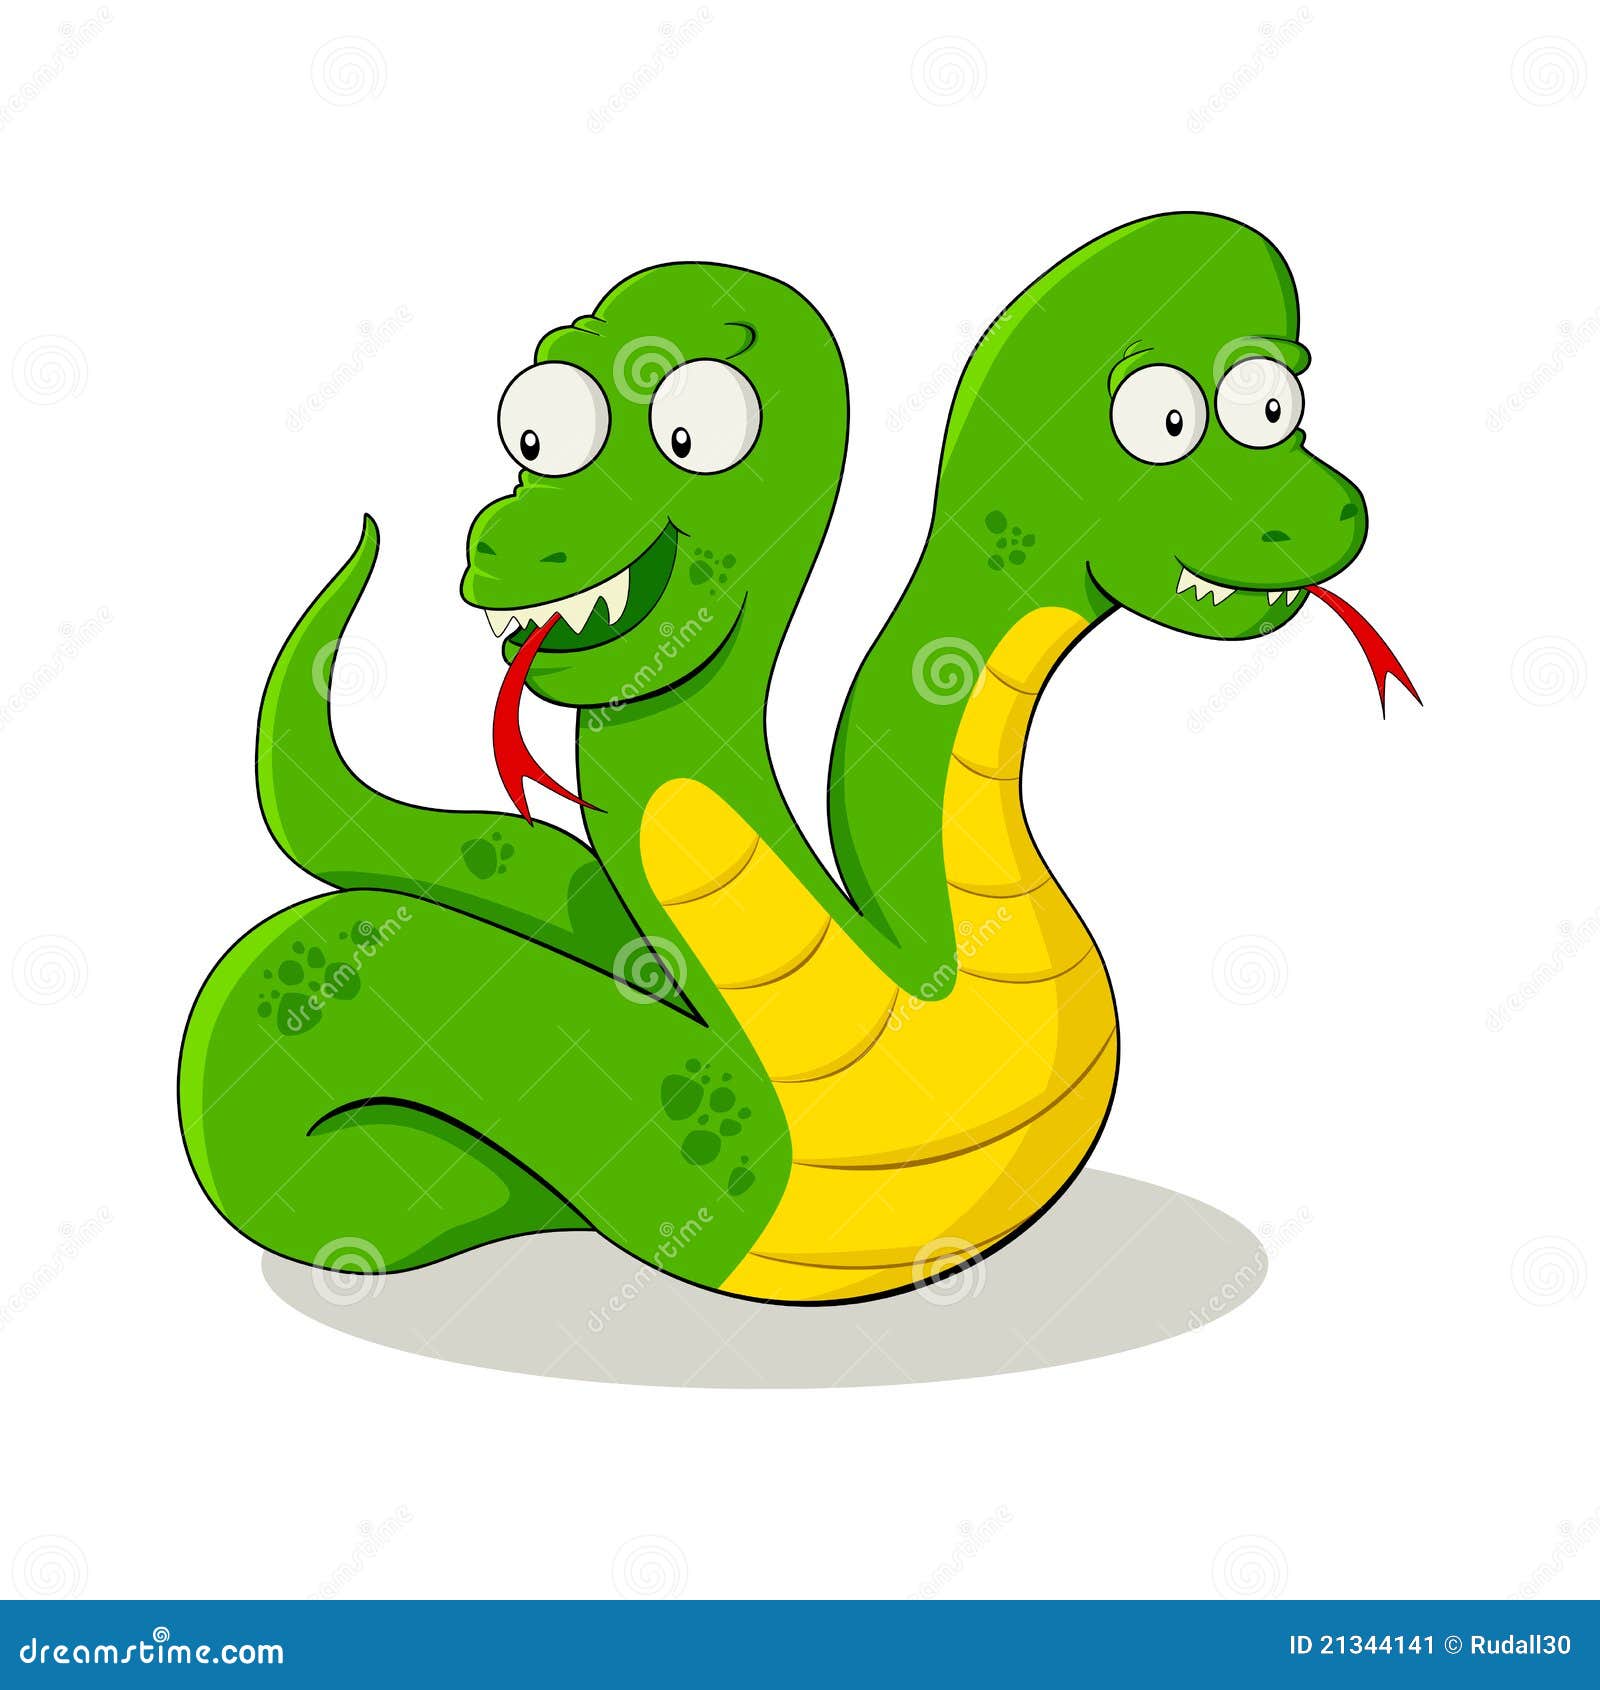 Two Headed Snake Stock Image - Image: 21344141